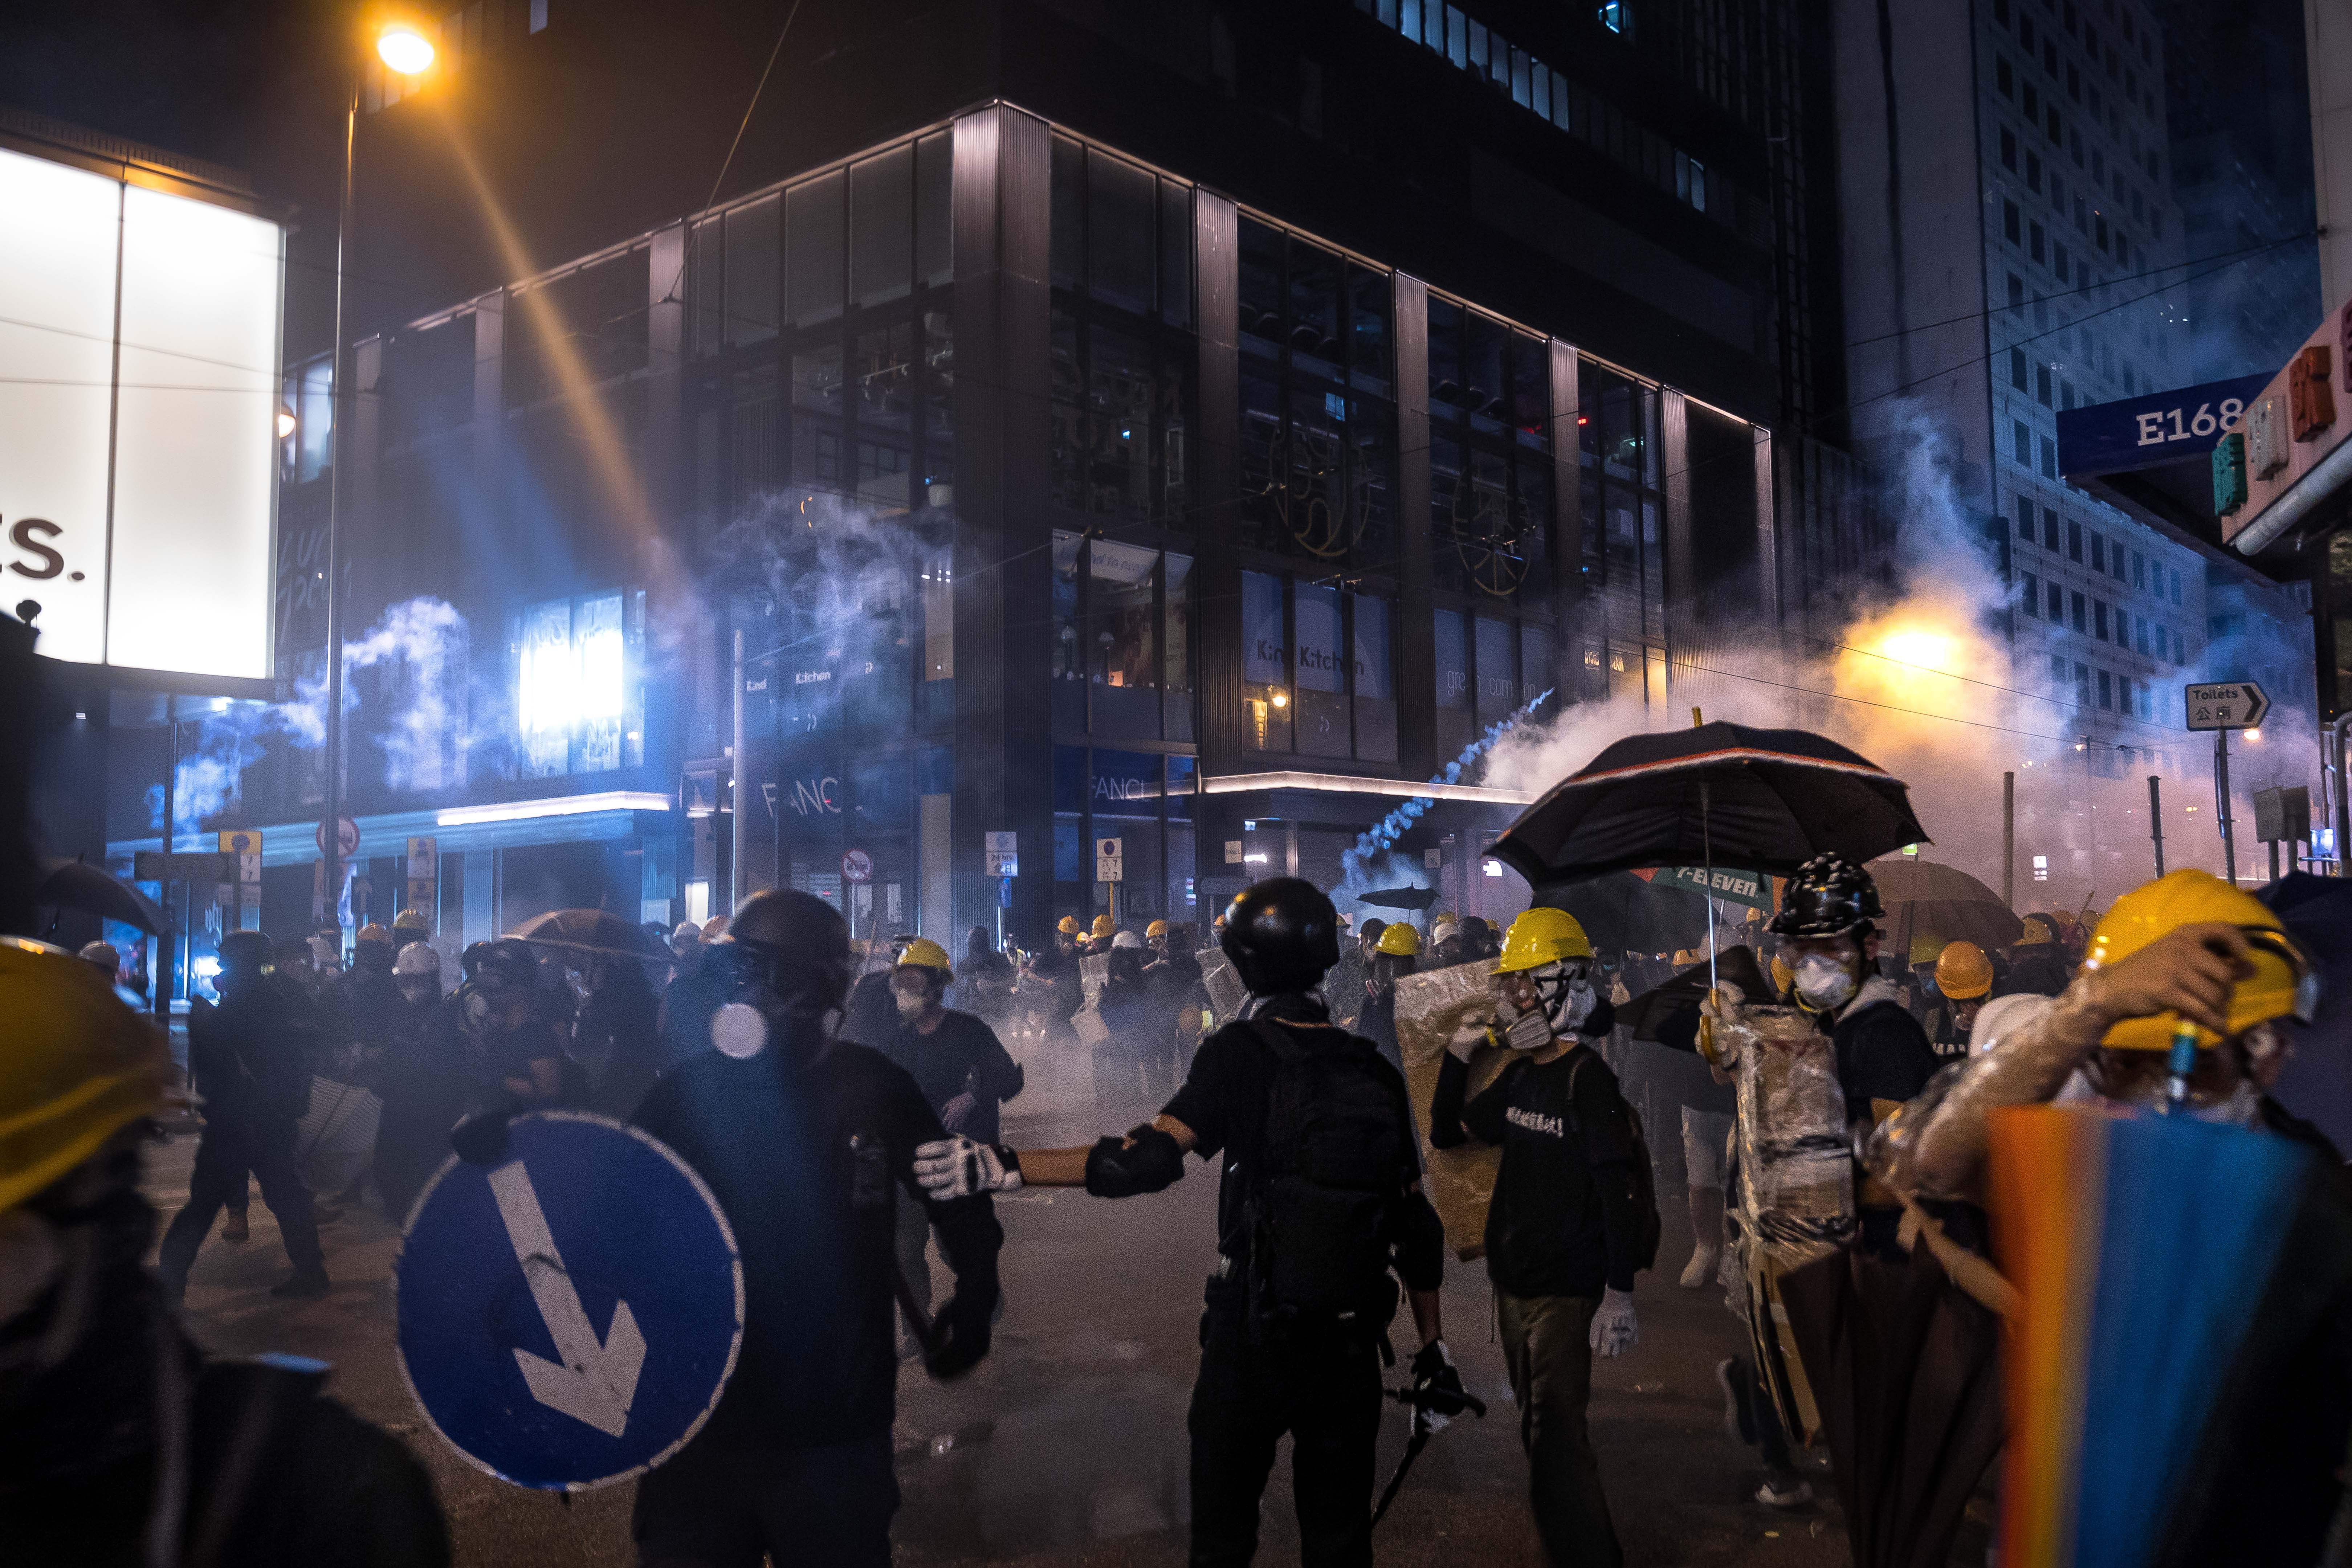 Protesters are enveloped by tear gas on street during a demonstration in the area of Sheung Wan